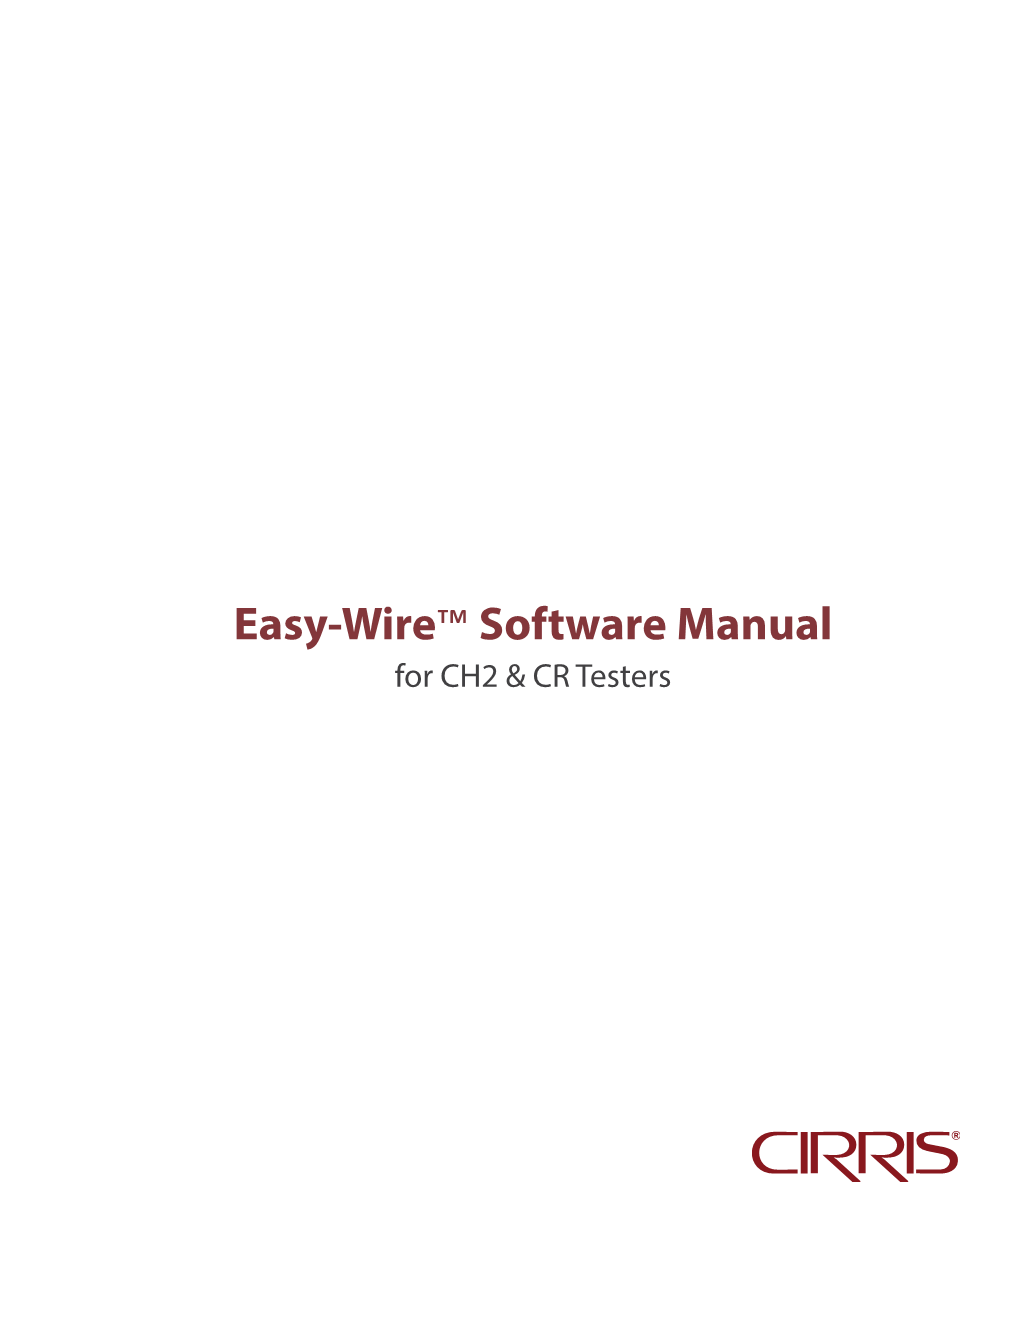 Easy-Wire Software Manual for CH2 & CR Testers